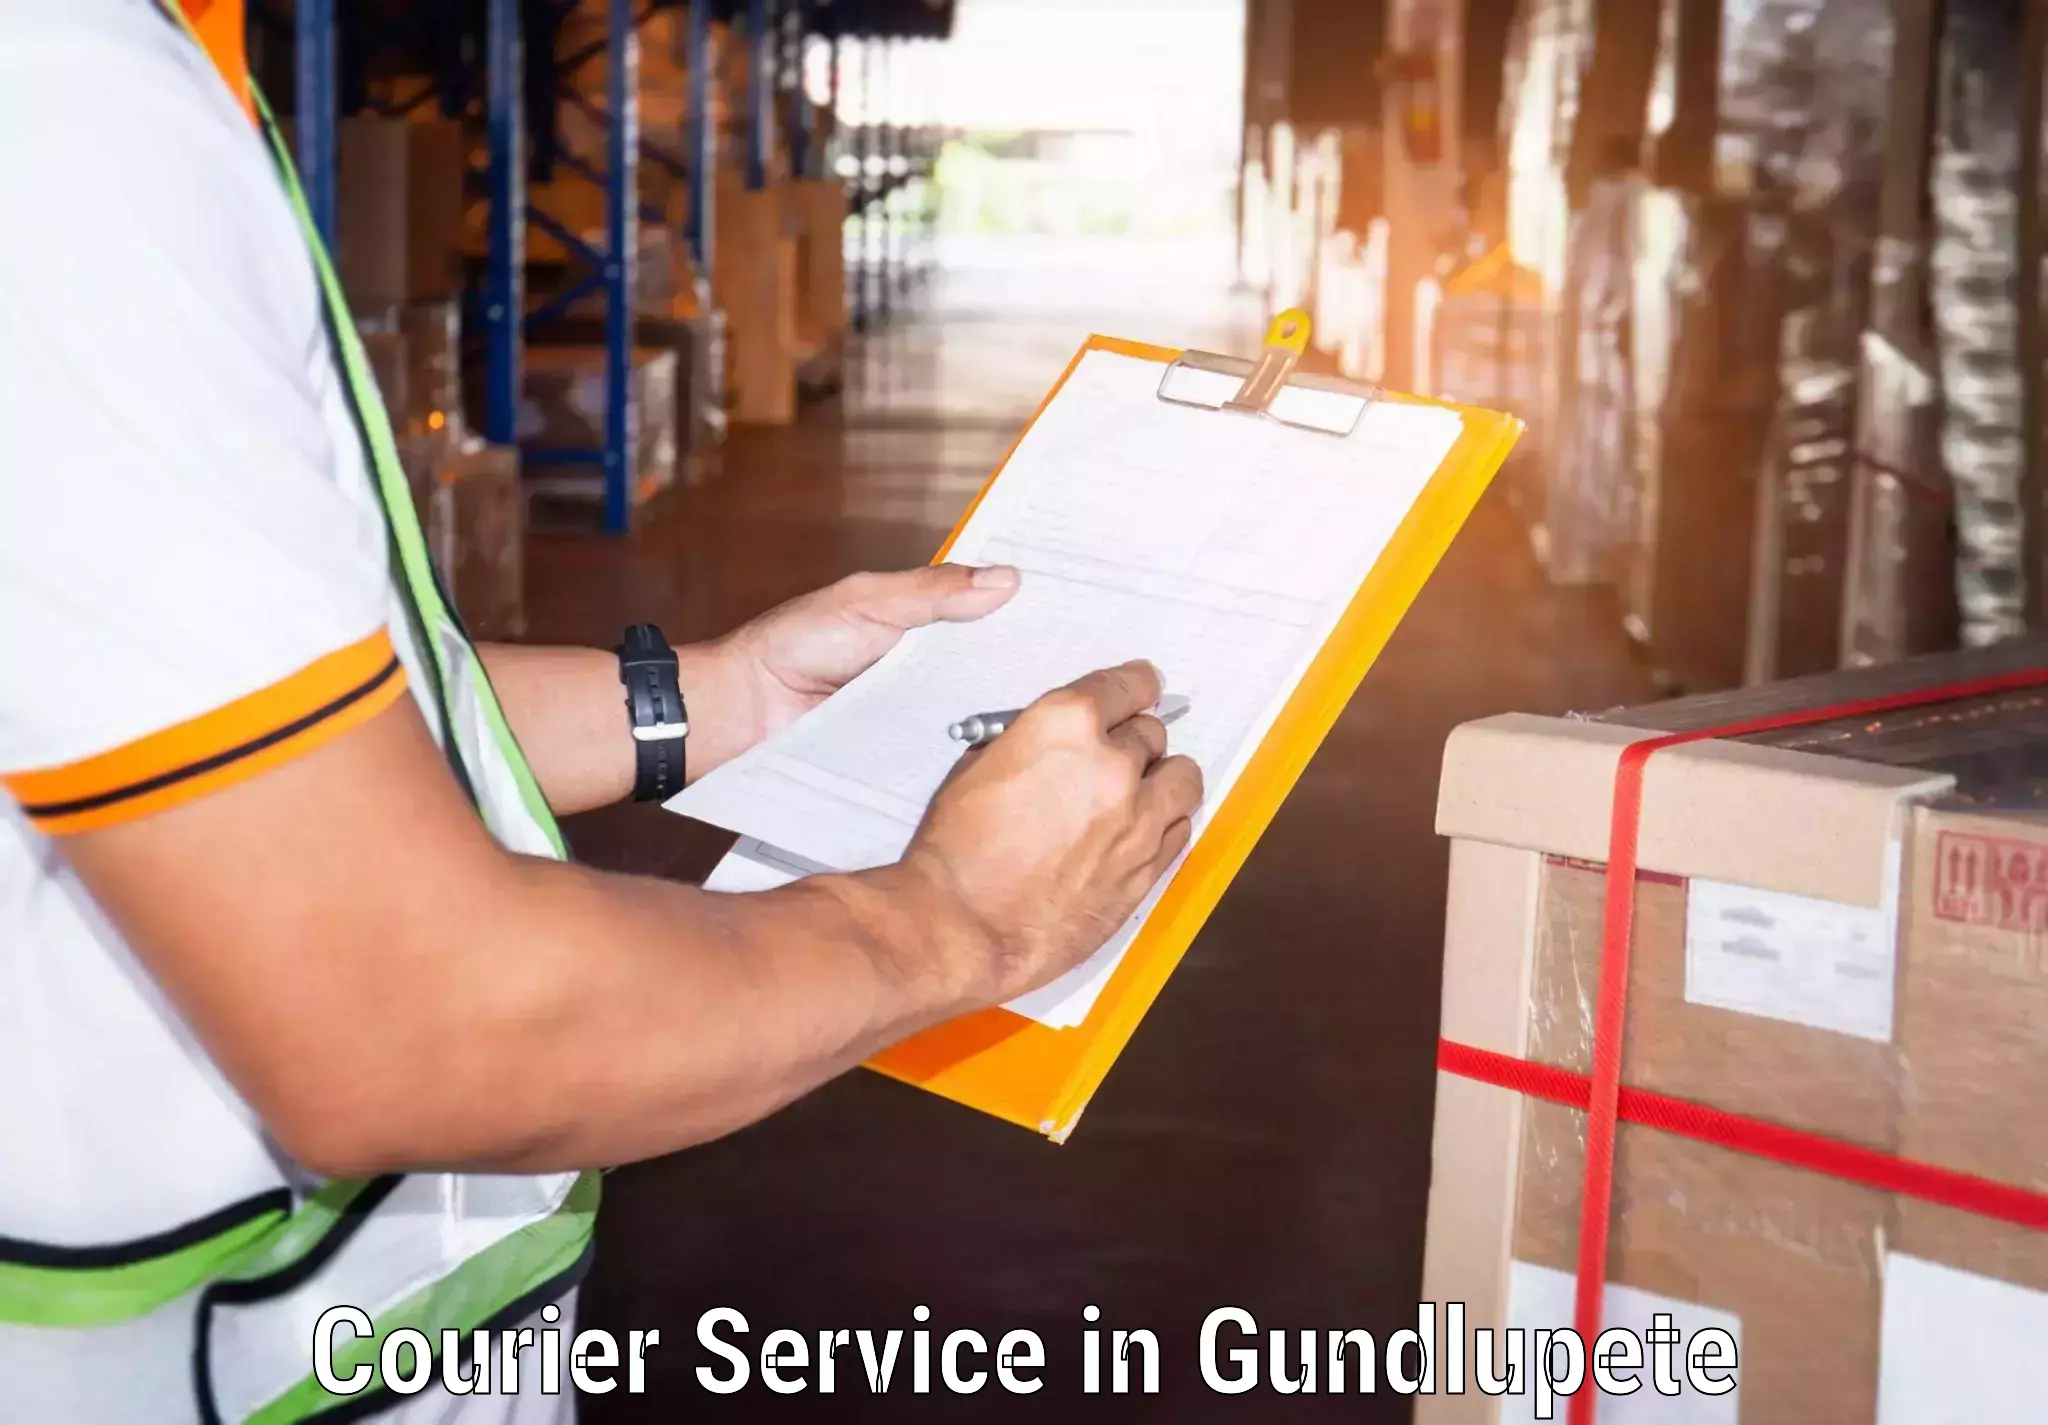 Courier services in Gundlupete